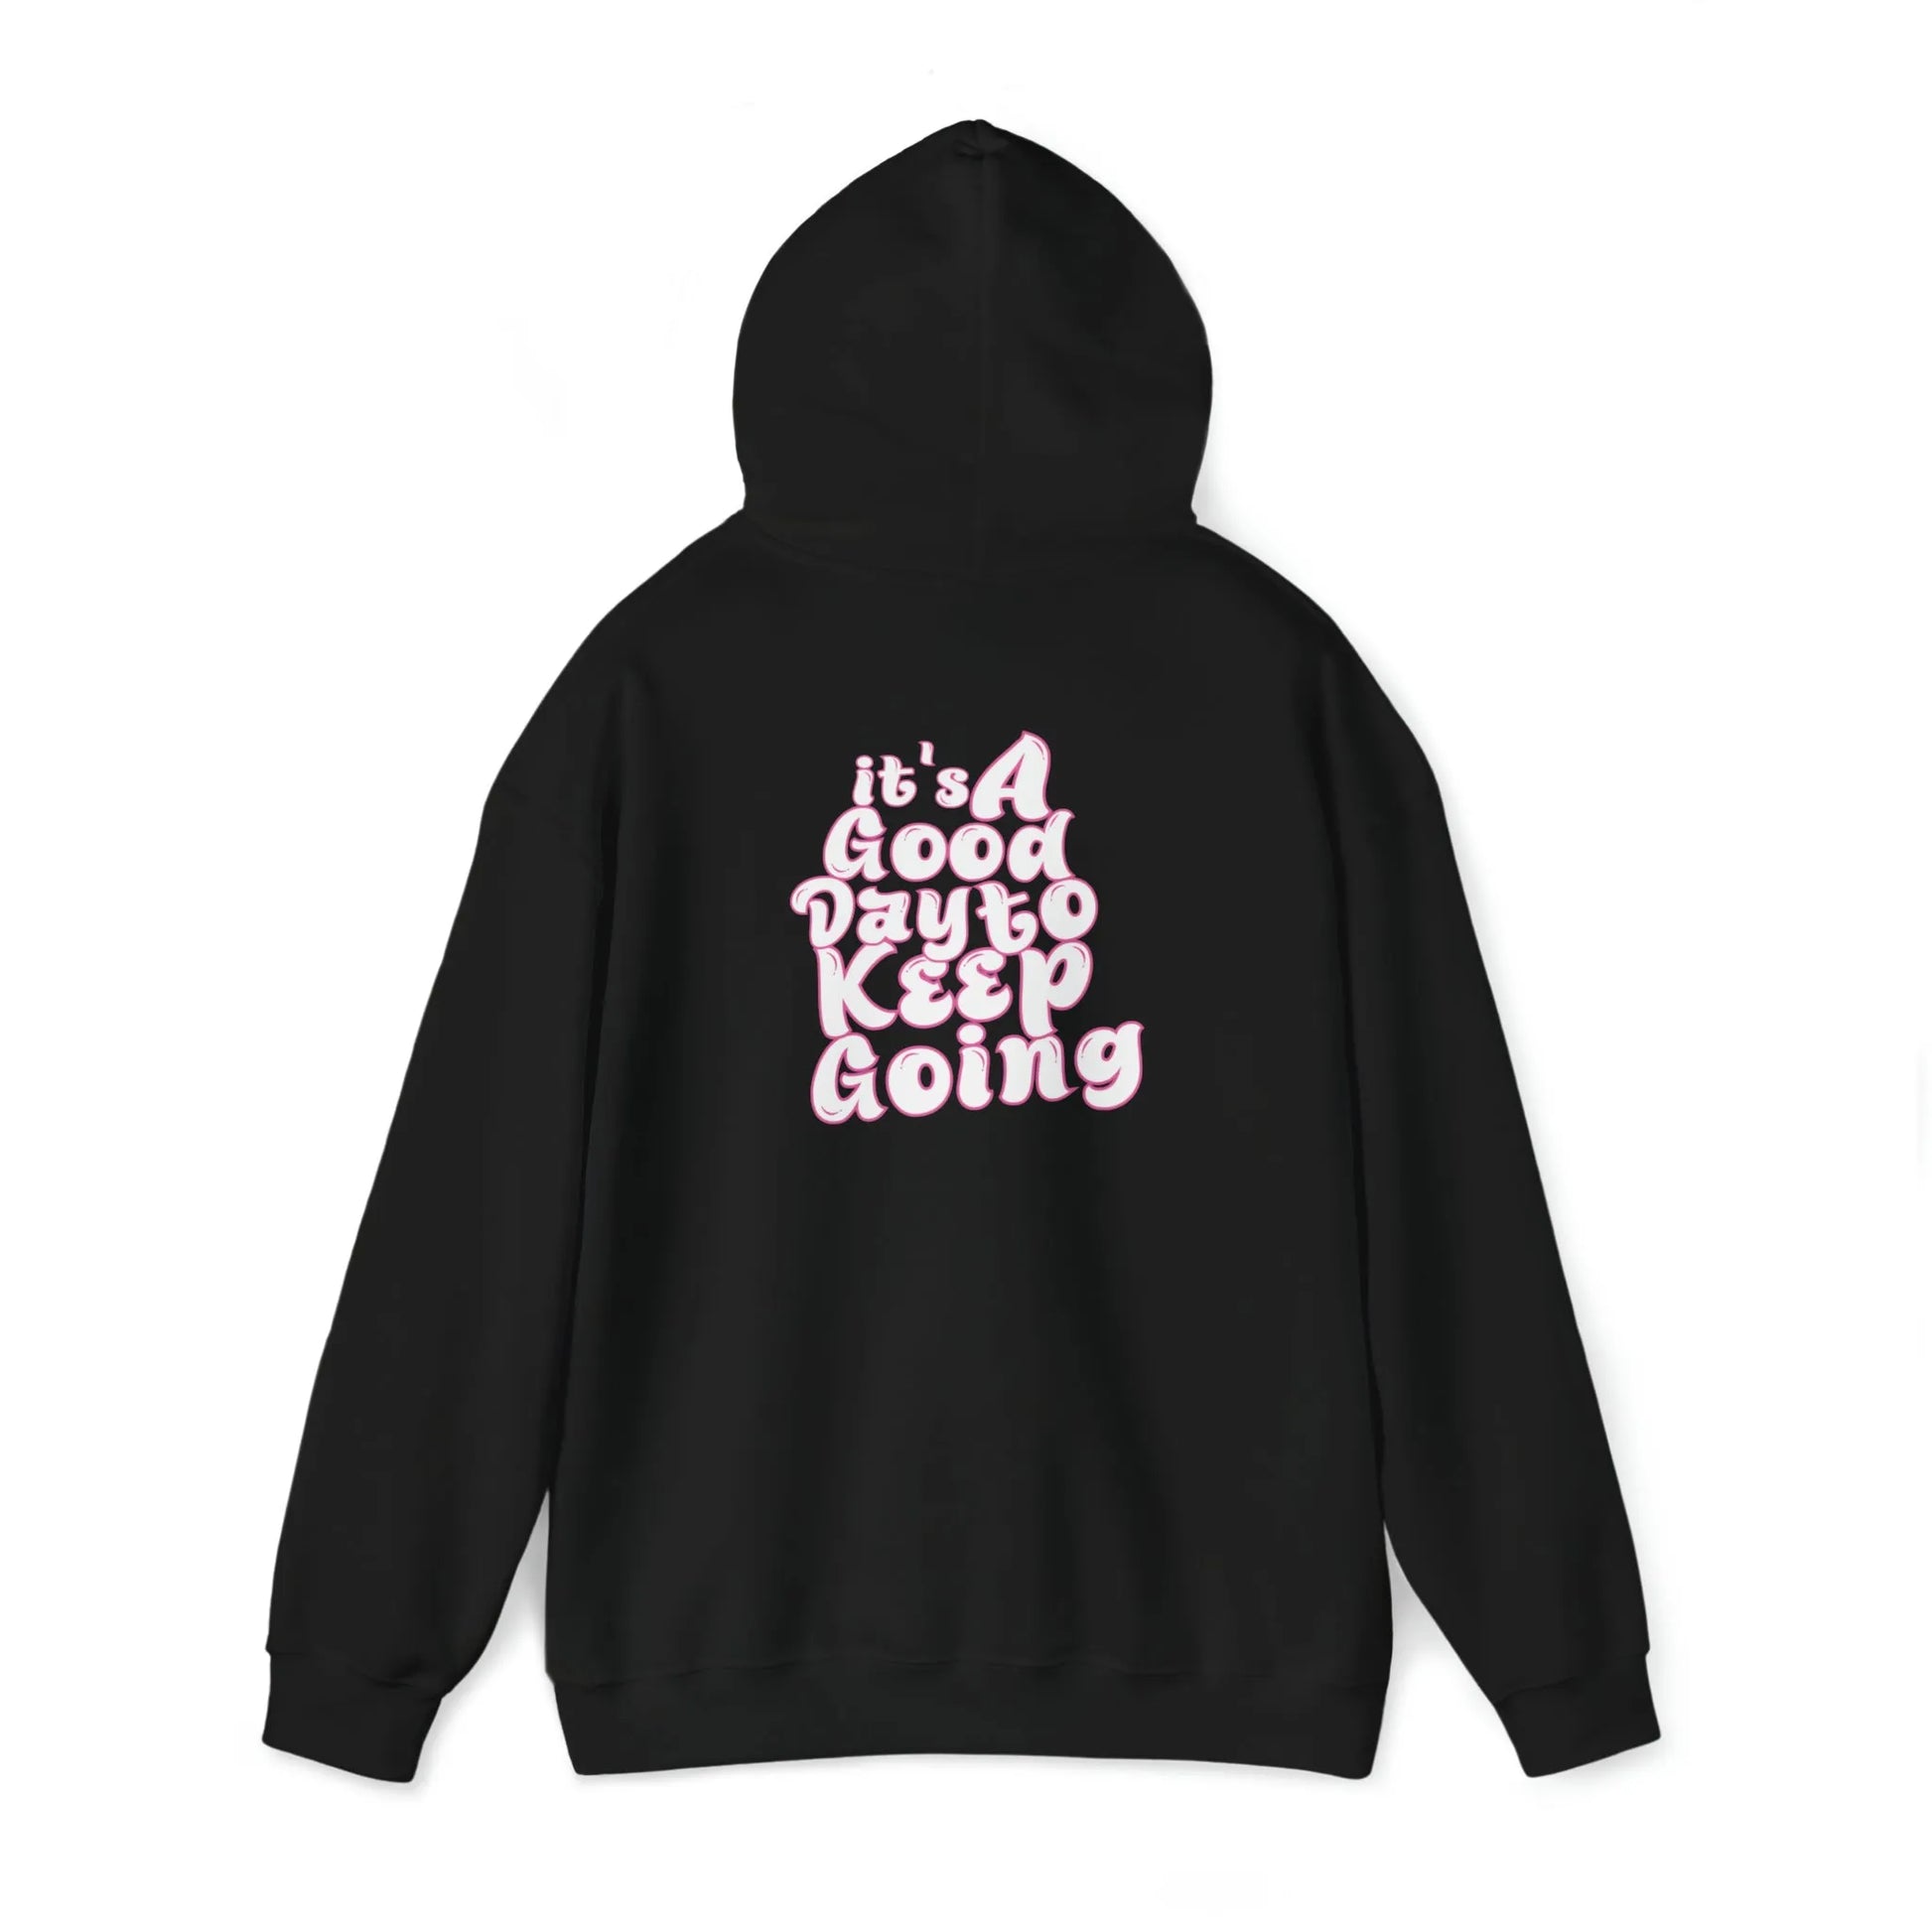 It's A Good Day To Keep Going Hoodie Pink Black Back Hood Up